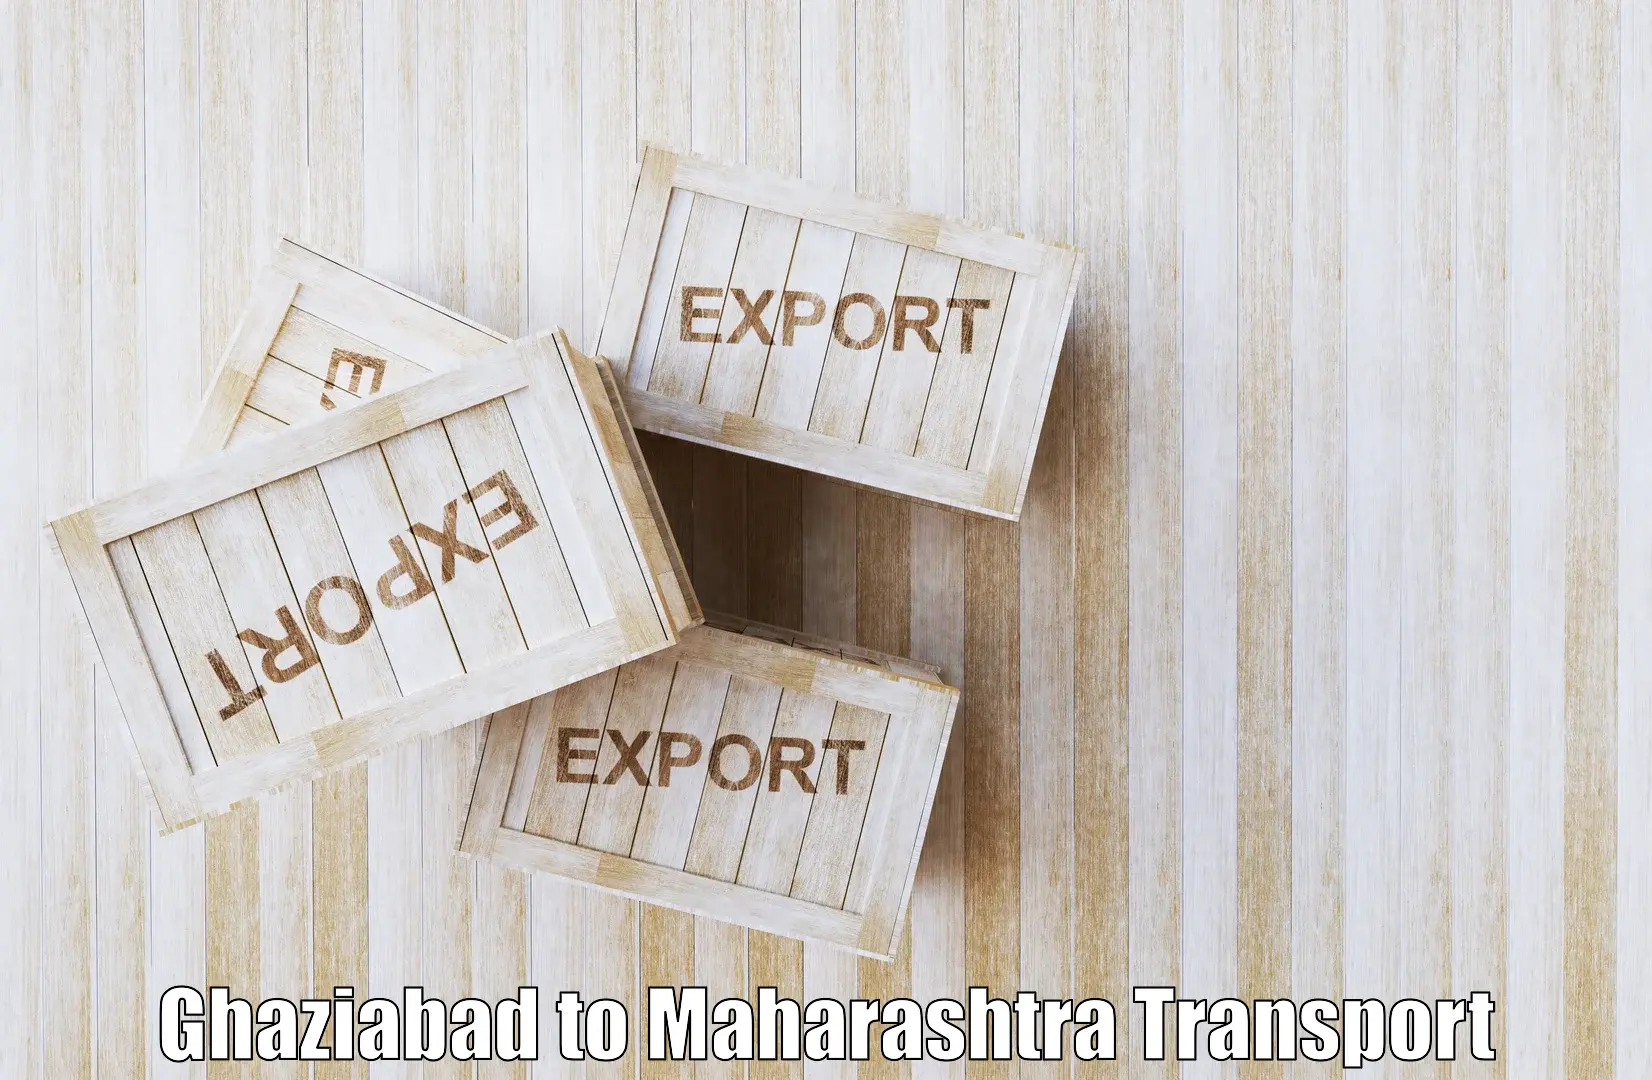 Daily parcel service transport Ghaziabad to Bhandara